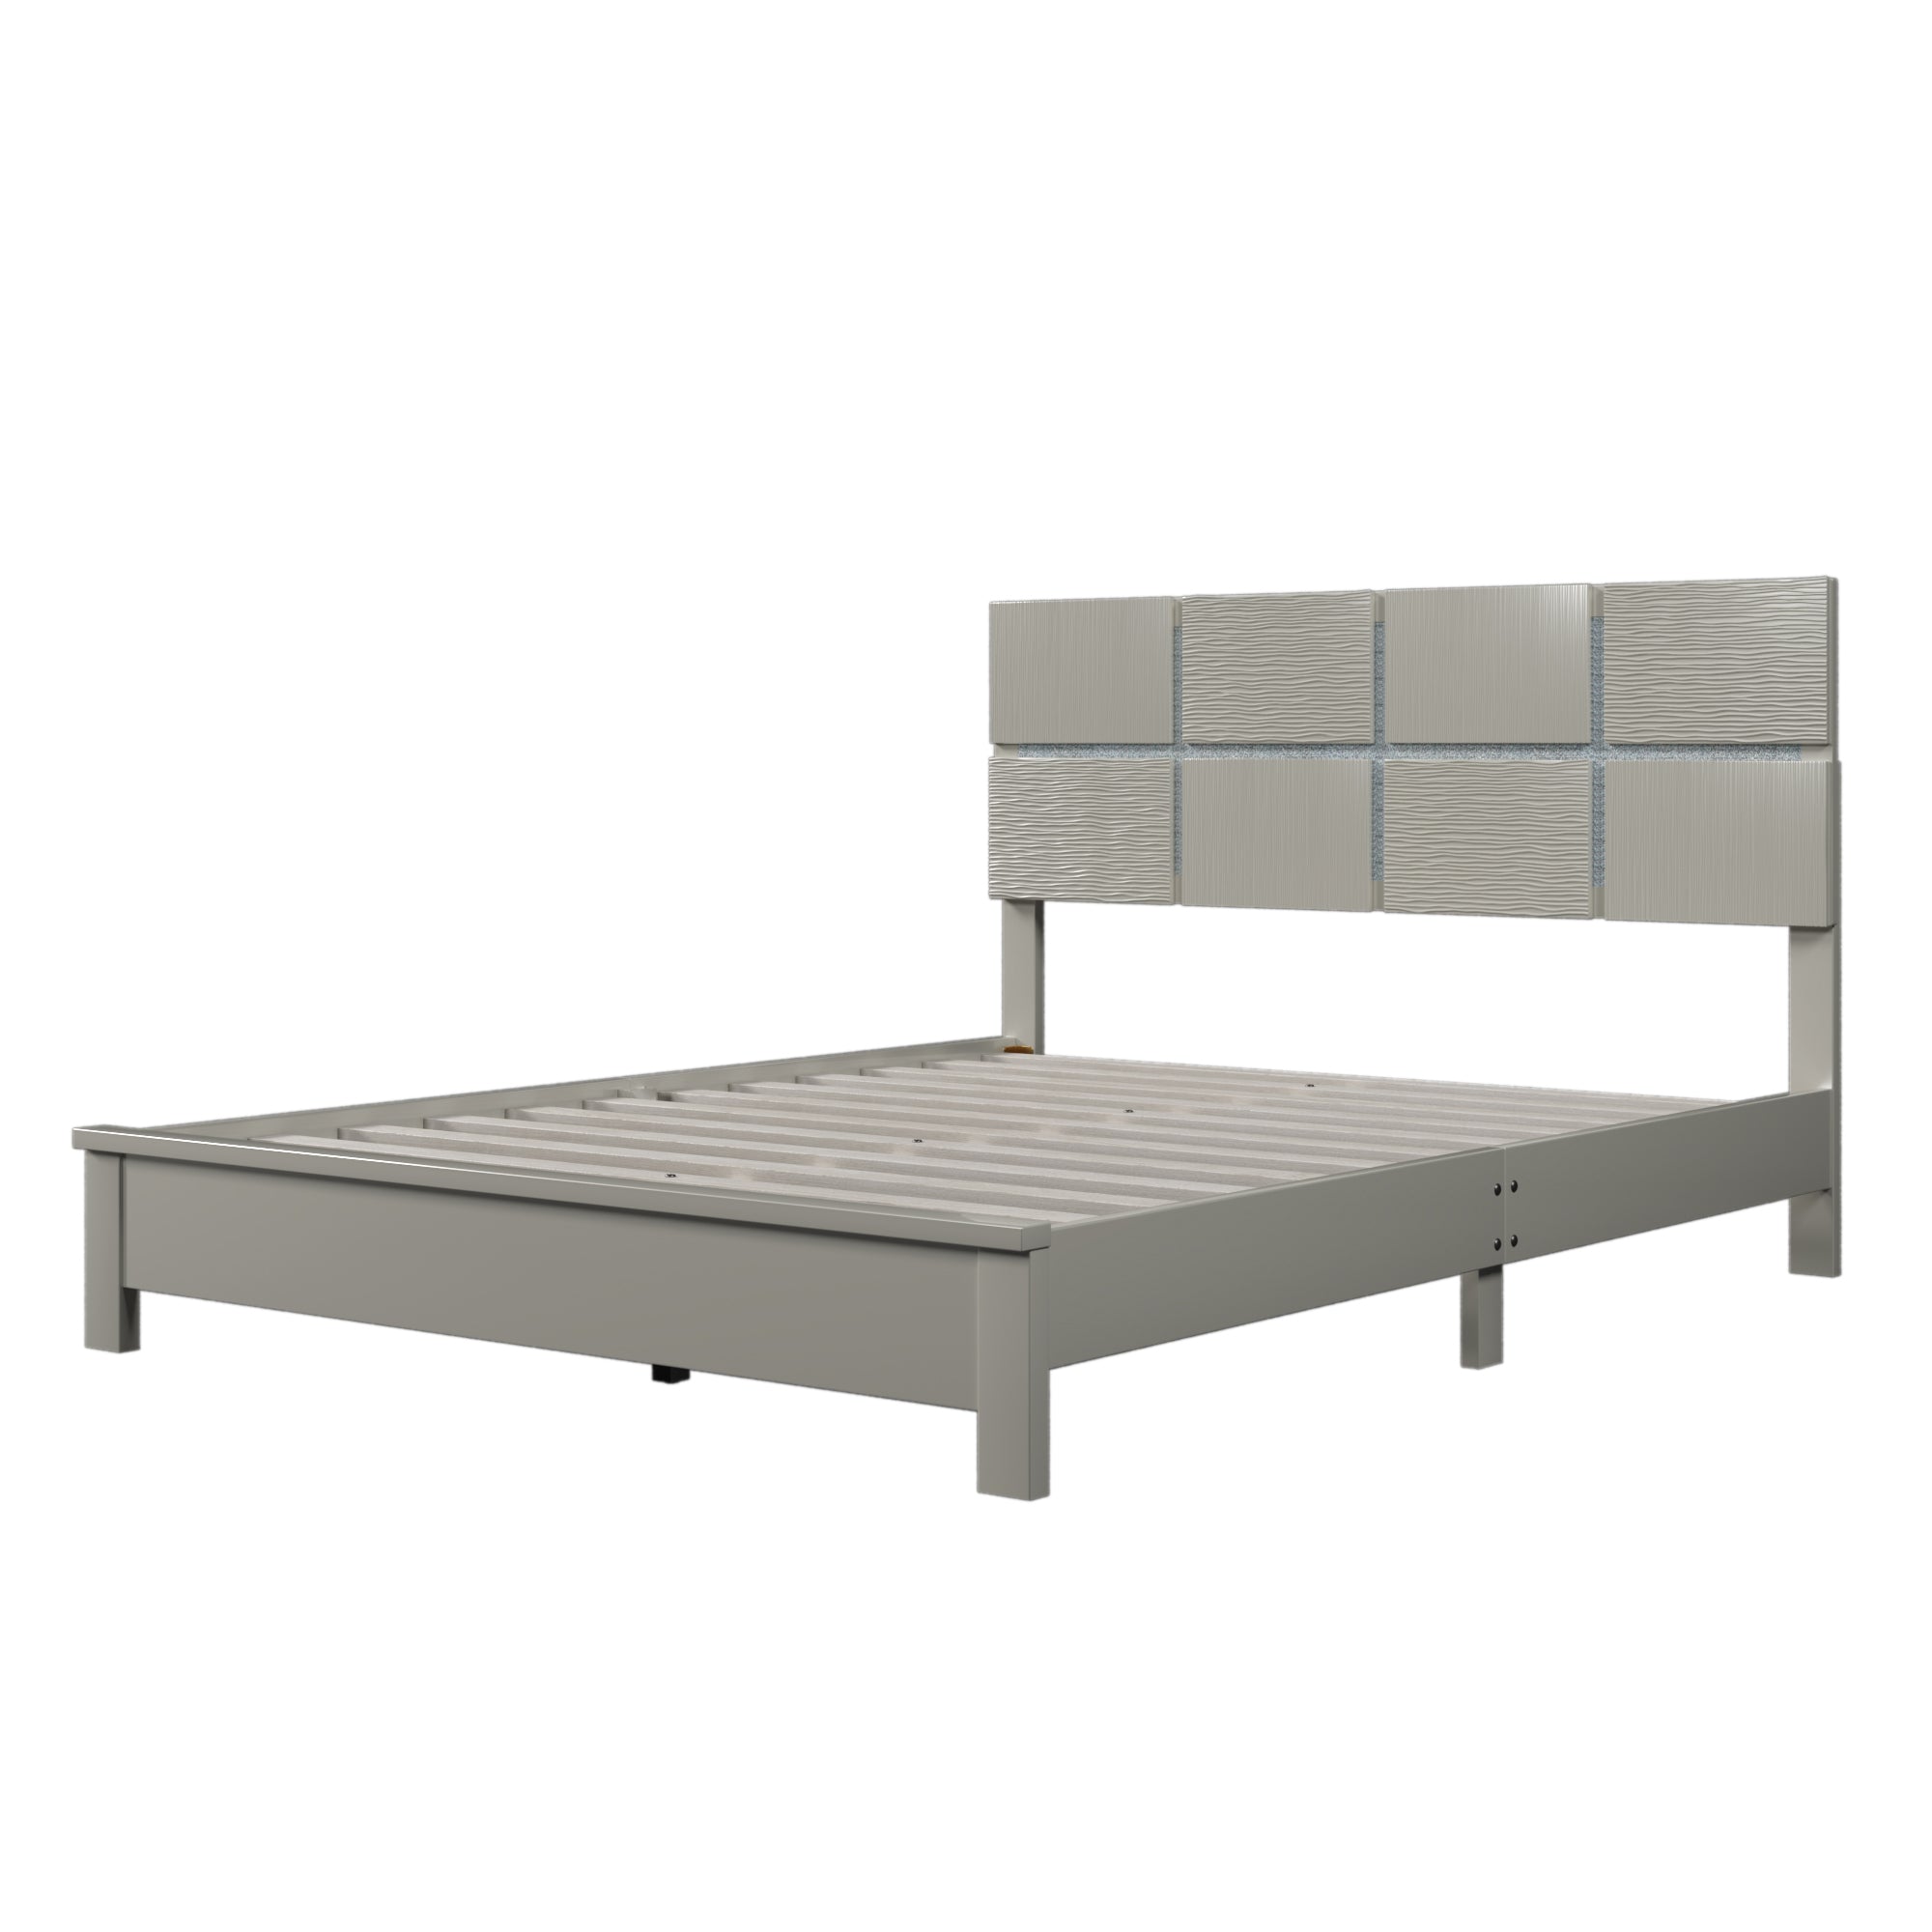 Queen Size Champagne Silver Platform Bed Solid Rubber Wood Frame and Legs - Champagne